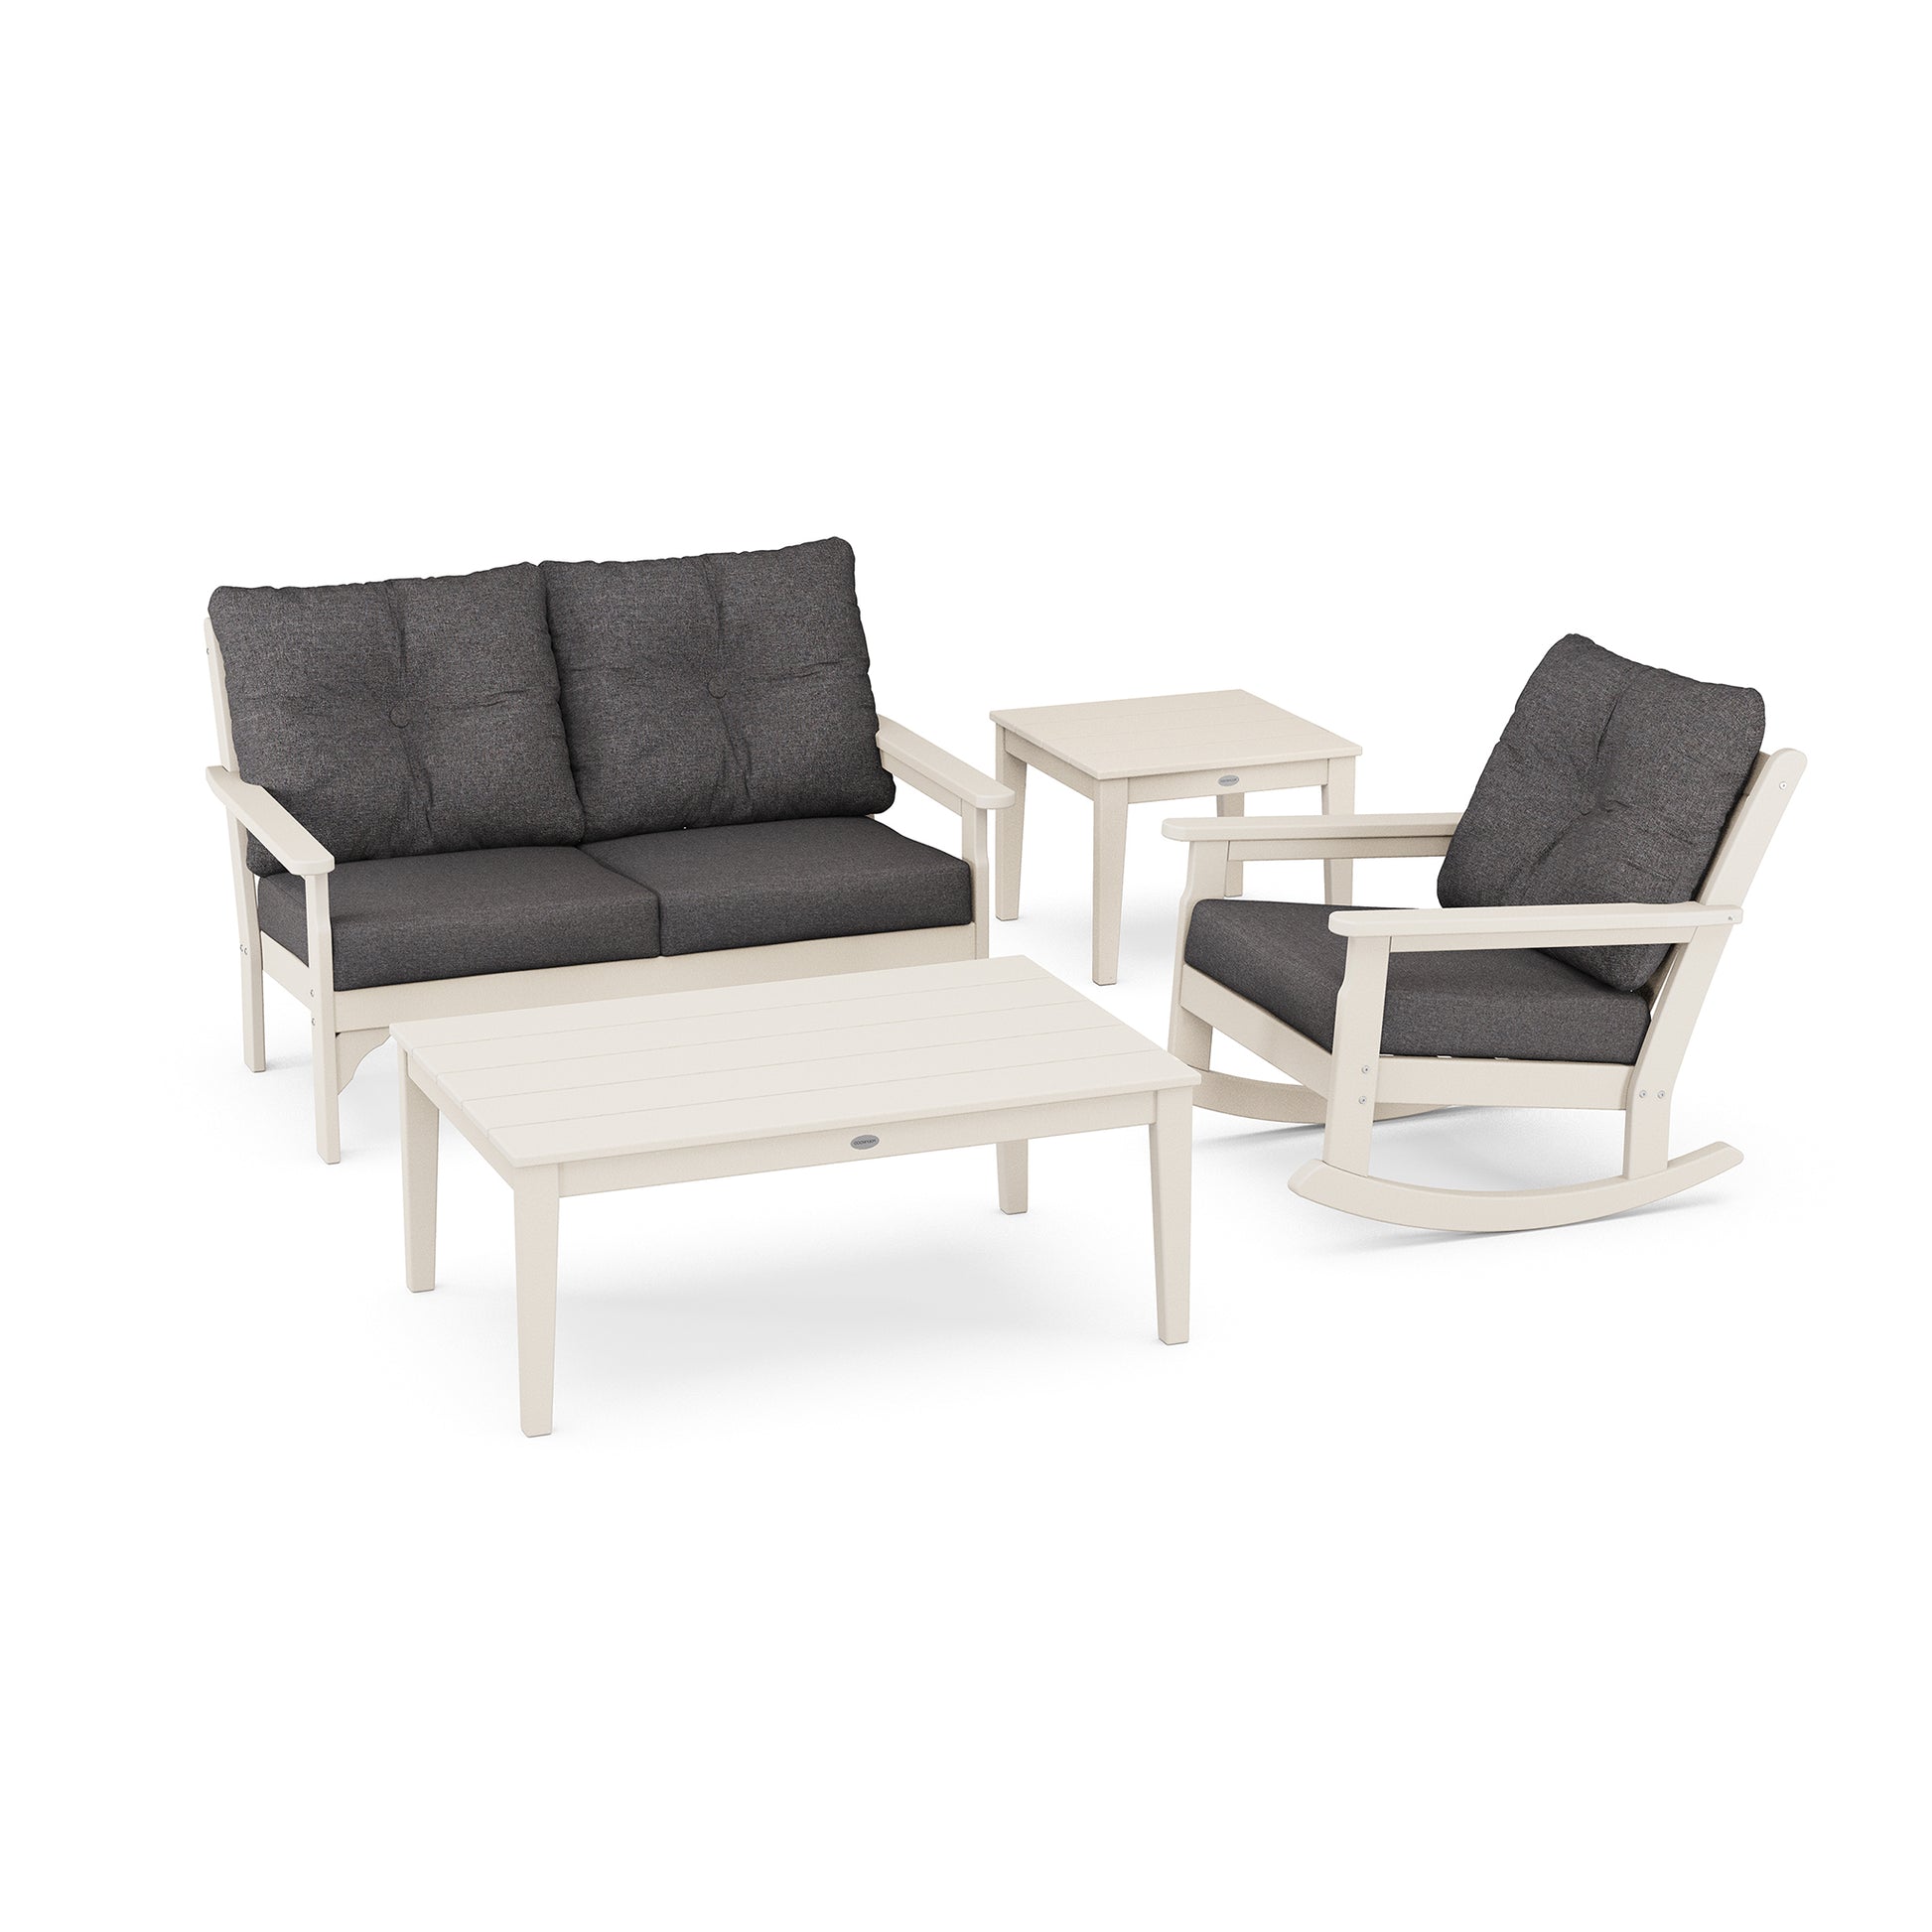 Outdoor furniture set including a sofa with gray cushions, two matching armchairs, and a rectangular coffee table from the POLYWOOD Vineyard 4-Piece Deep Seating Rocker Set.